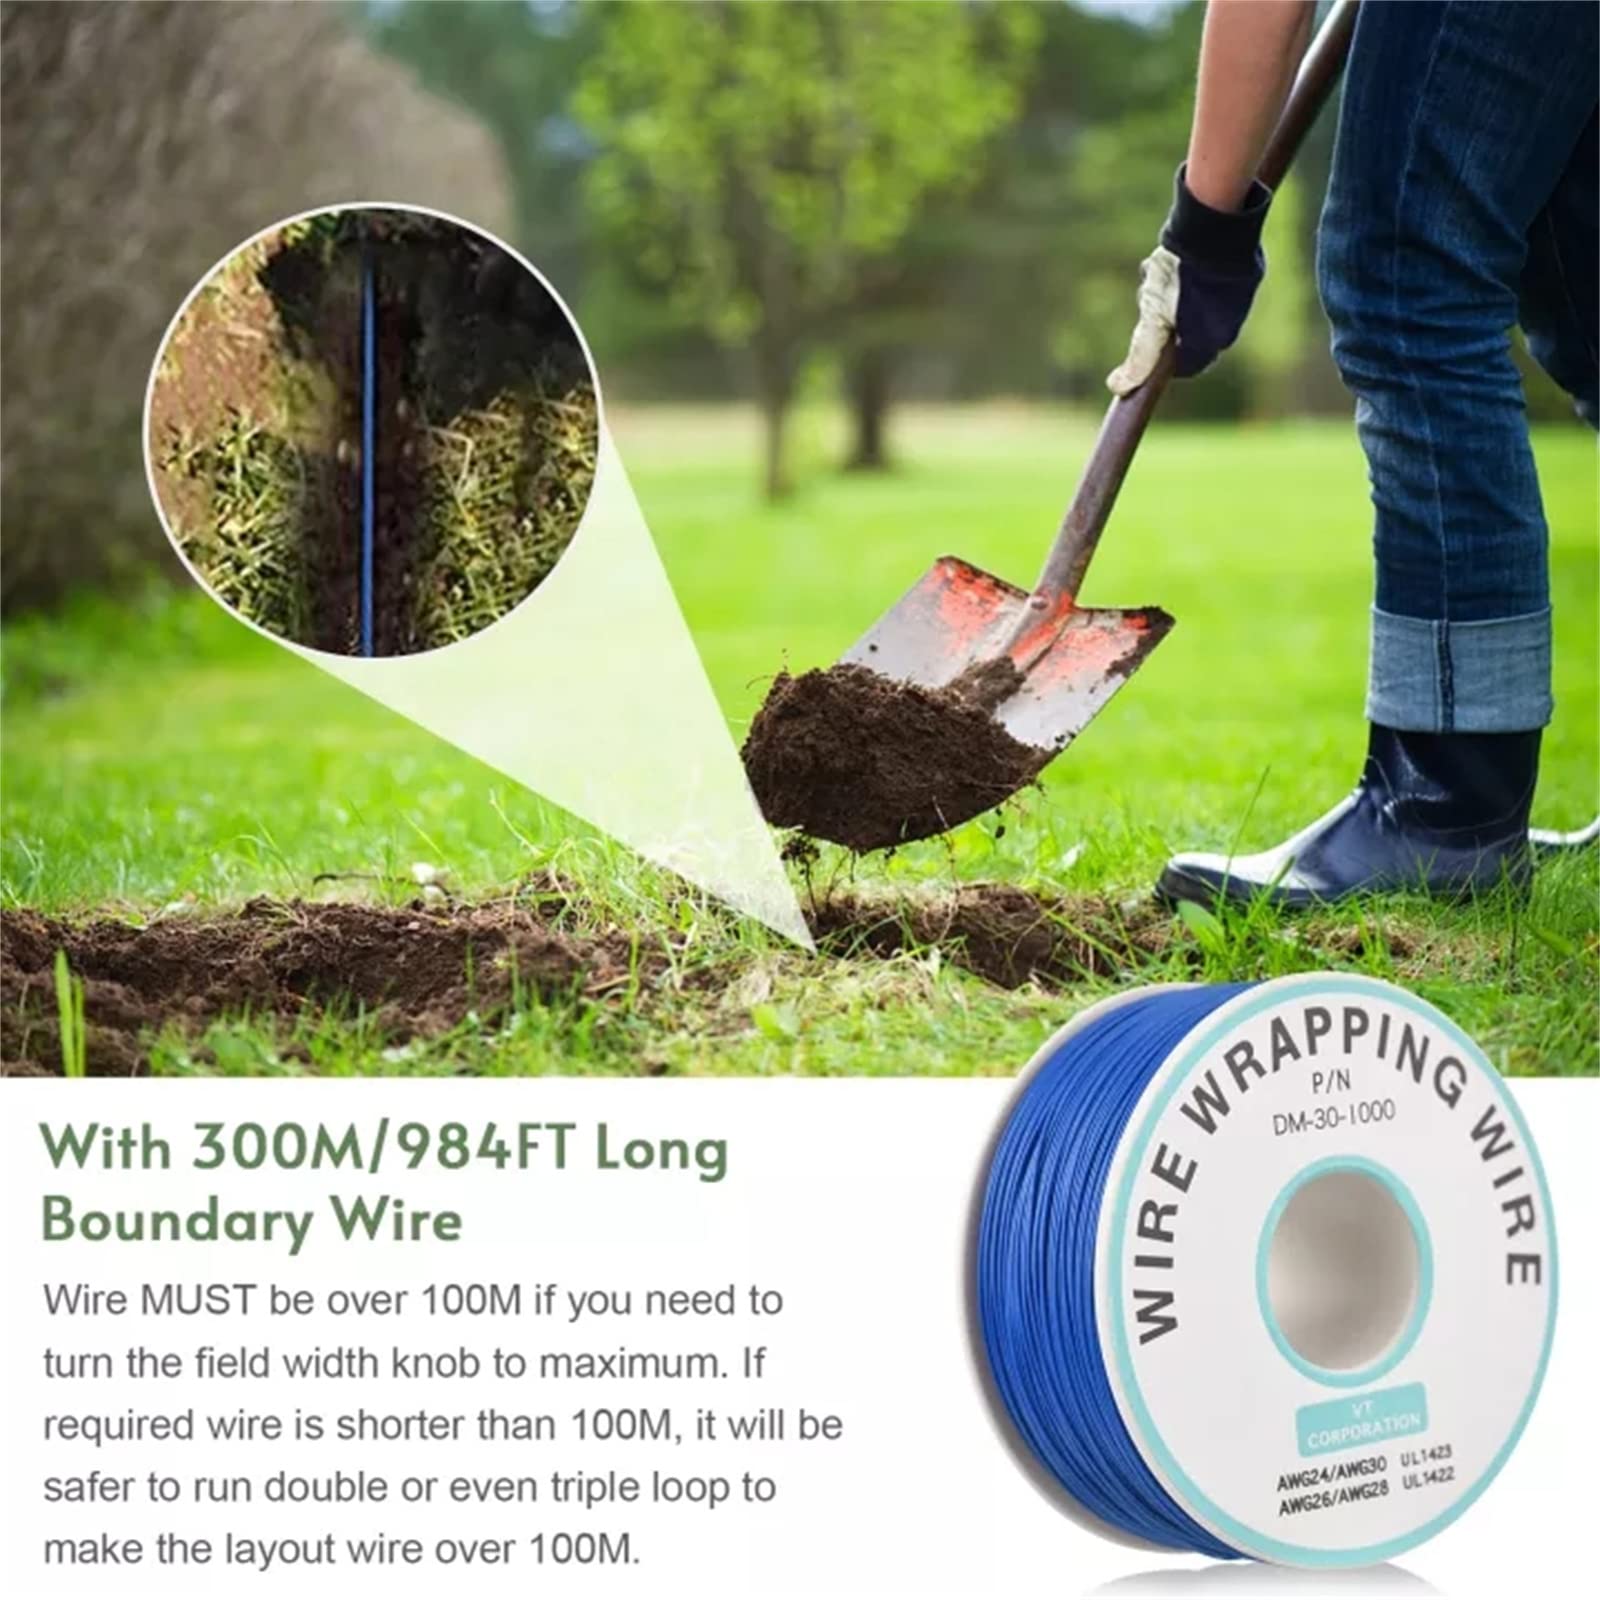 HEXIEDEN Electric Dog Fence,Aboveground/Underground Pet Containment System,with Waterproof/Rechargeable Collar,656Ft Underground Boundary Wire,Shock/Tone Correction,for 1 2 3 Dogs,for2dogs